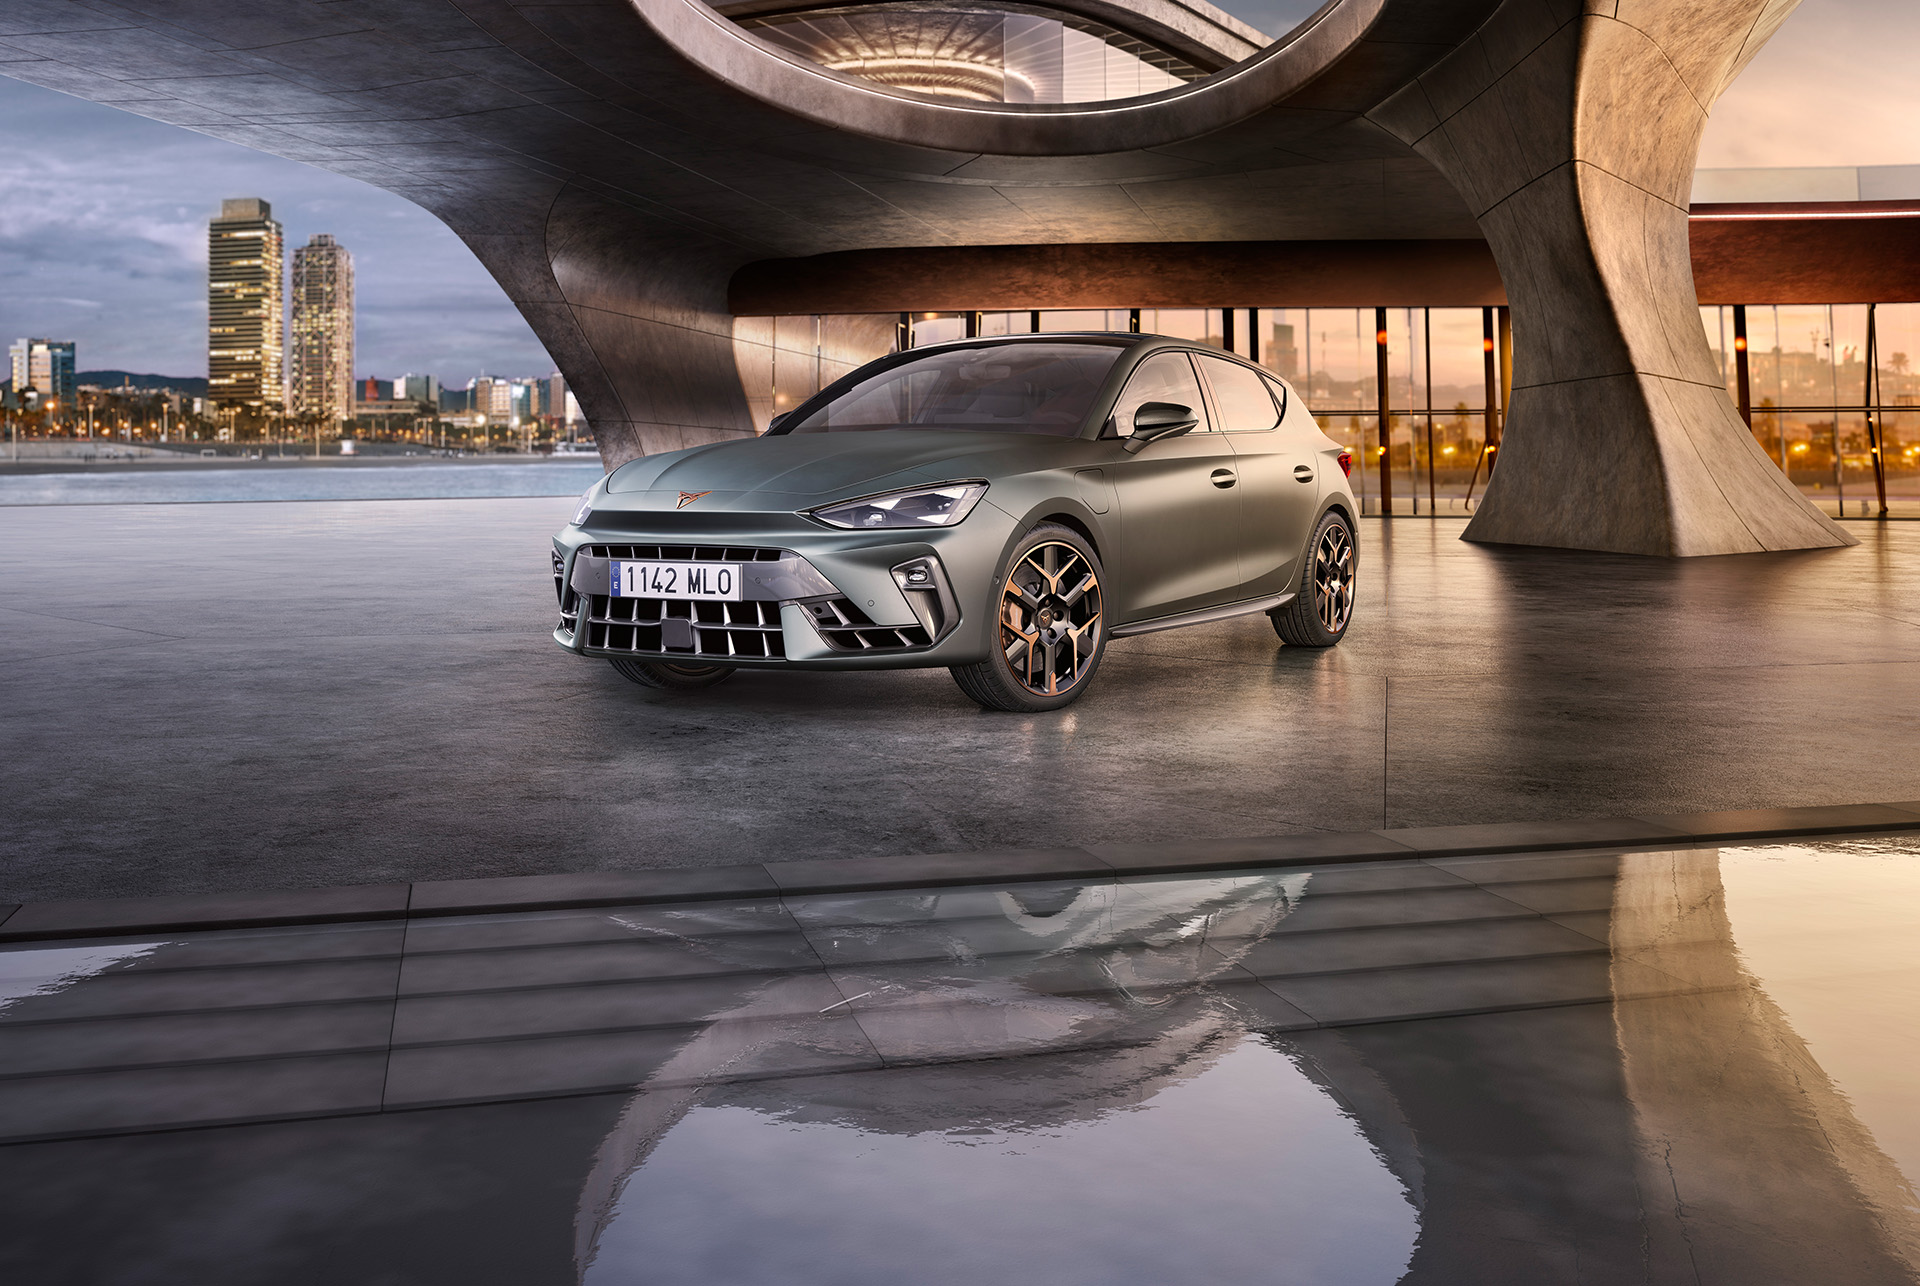 A new cupra leon 2024 in enceladus grey matte with copper accent alloy wheels parked on smooth concrete under an architectural structure. Barcelona cityscape in the background. 